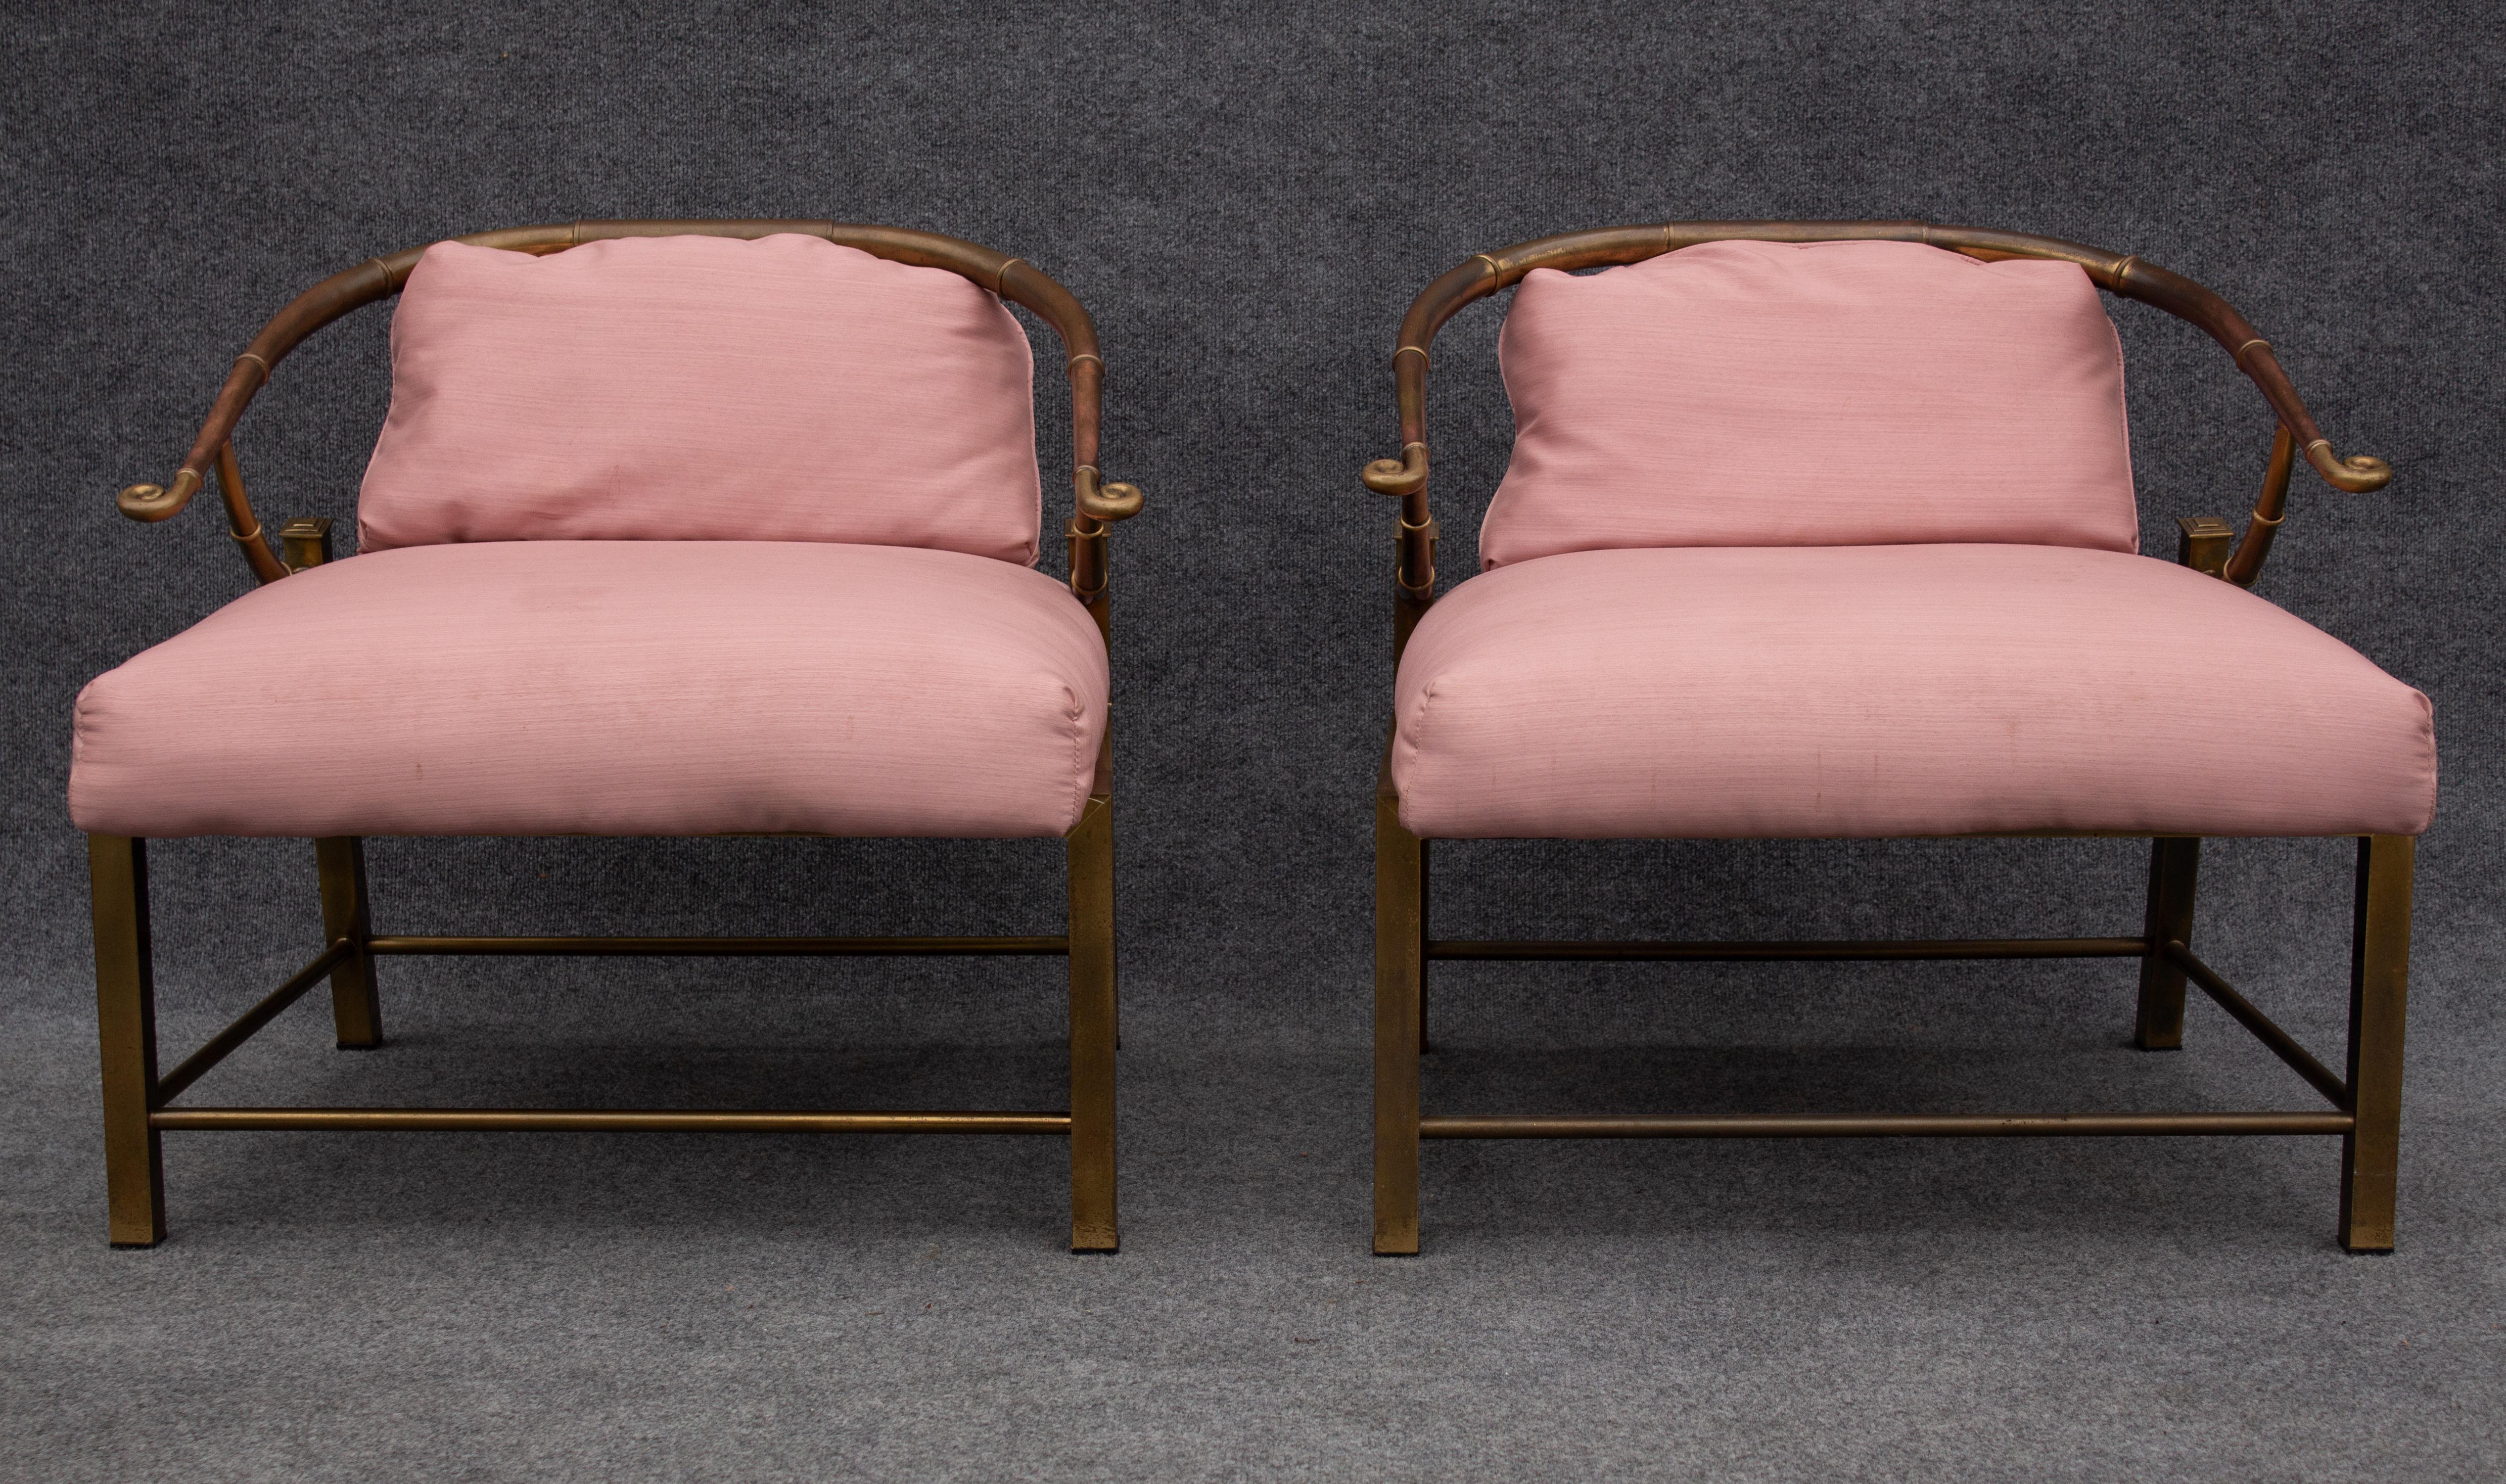 Pair of Warren Lloyd for Mastercraft Brass & Pink Fabric 'Empress' Lounge Chairs In Good Condition For Sale In Philadelphia, PA